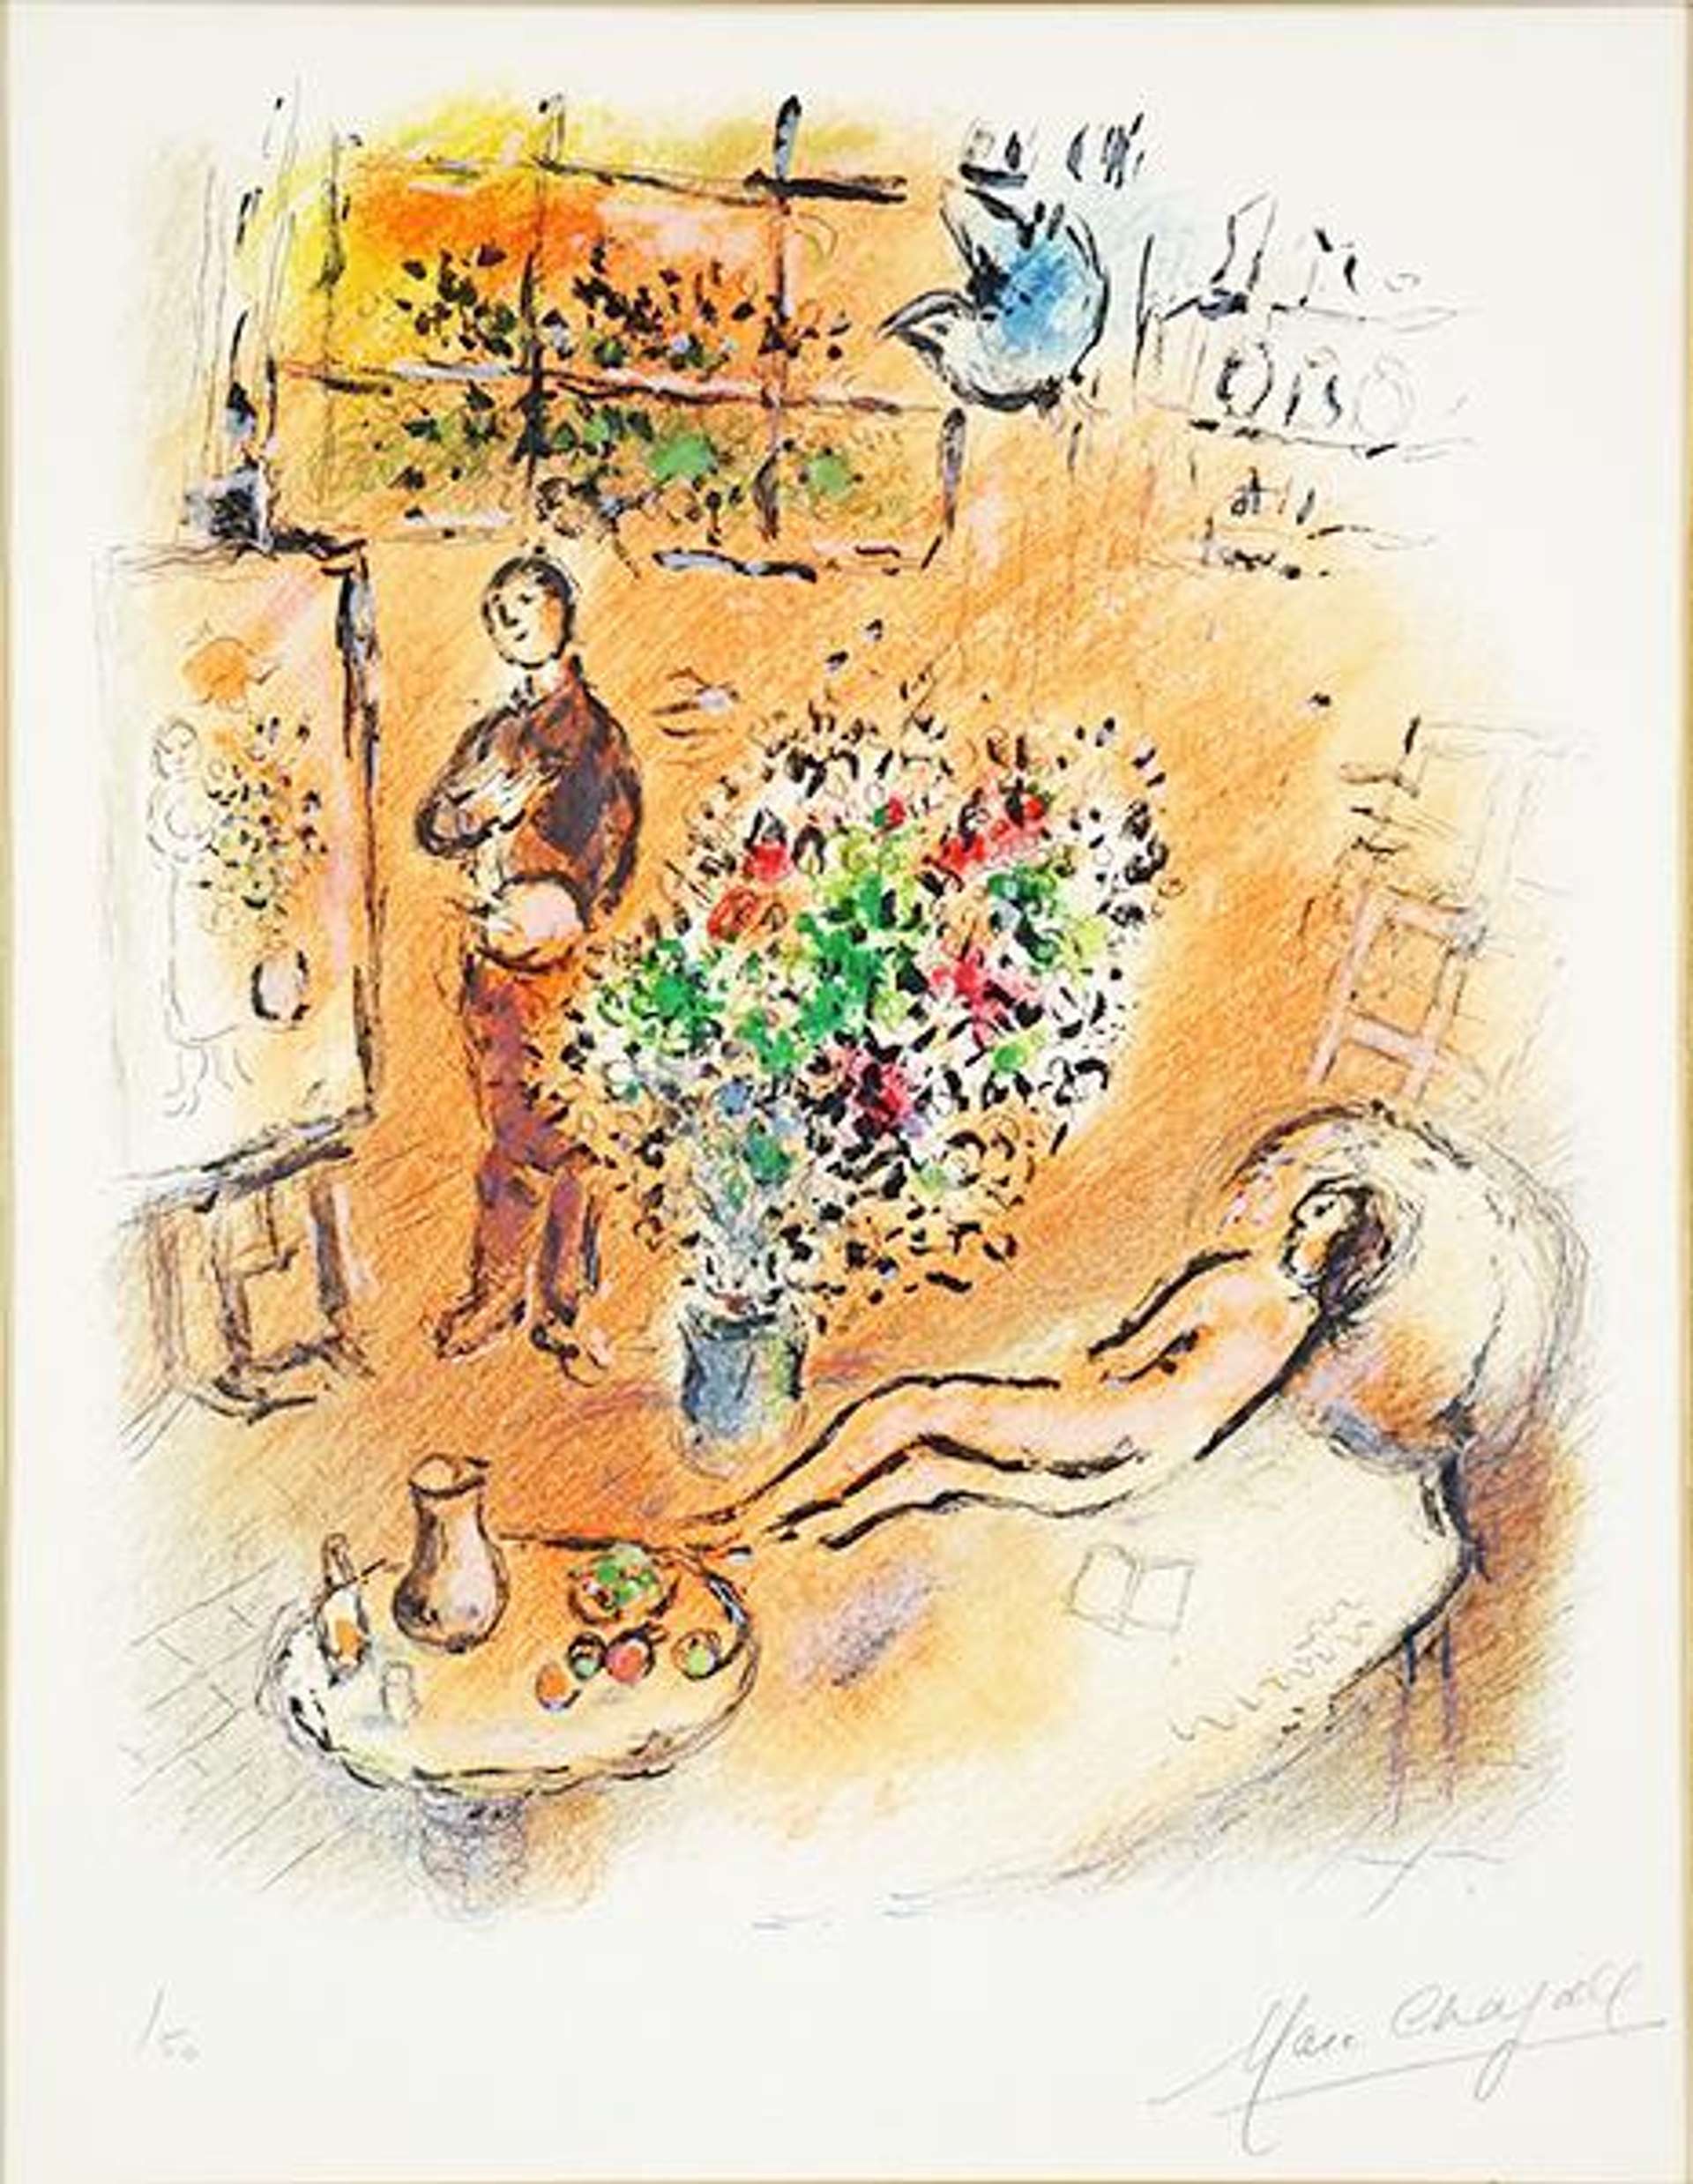 Marc Chagall: Atelier Ensoleille - Signed Print